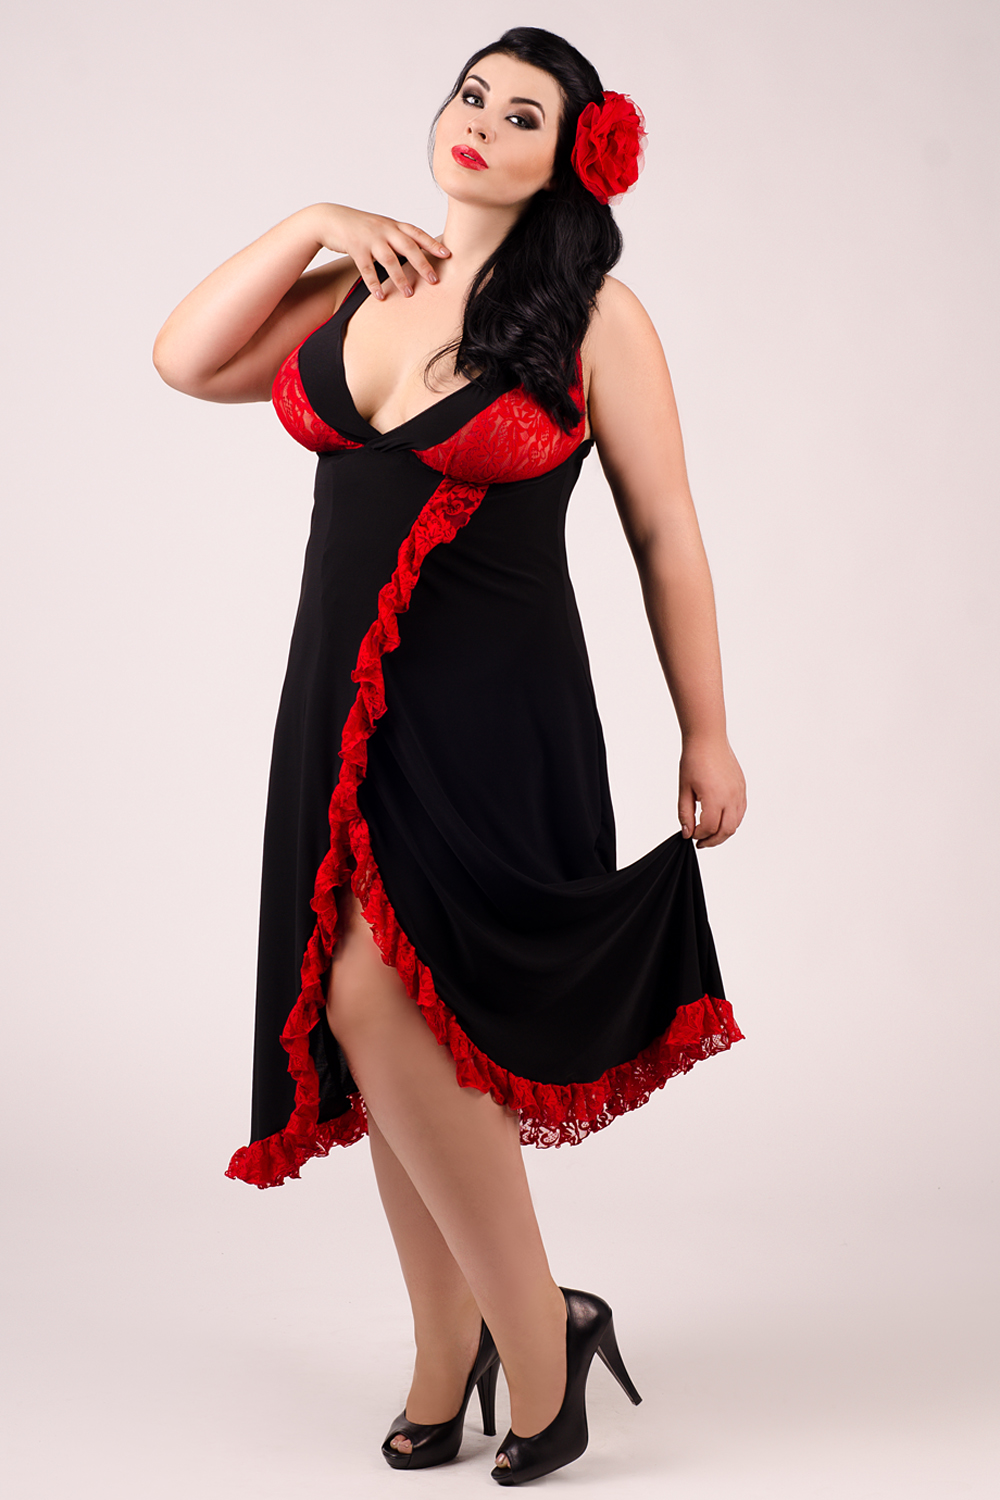 Black night gown with red lace